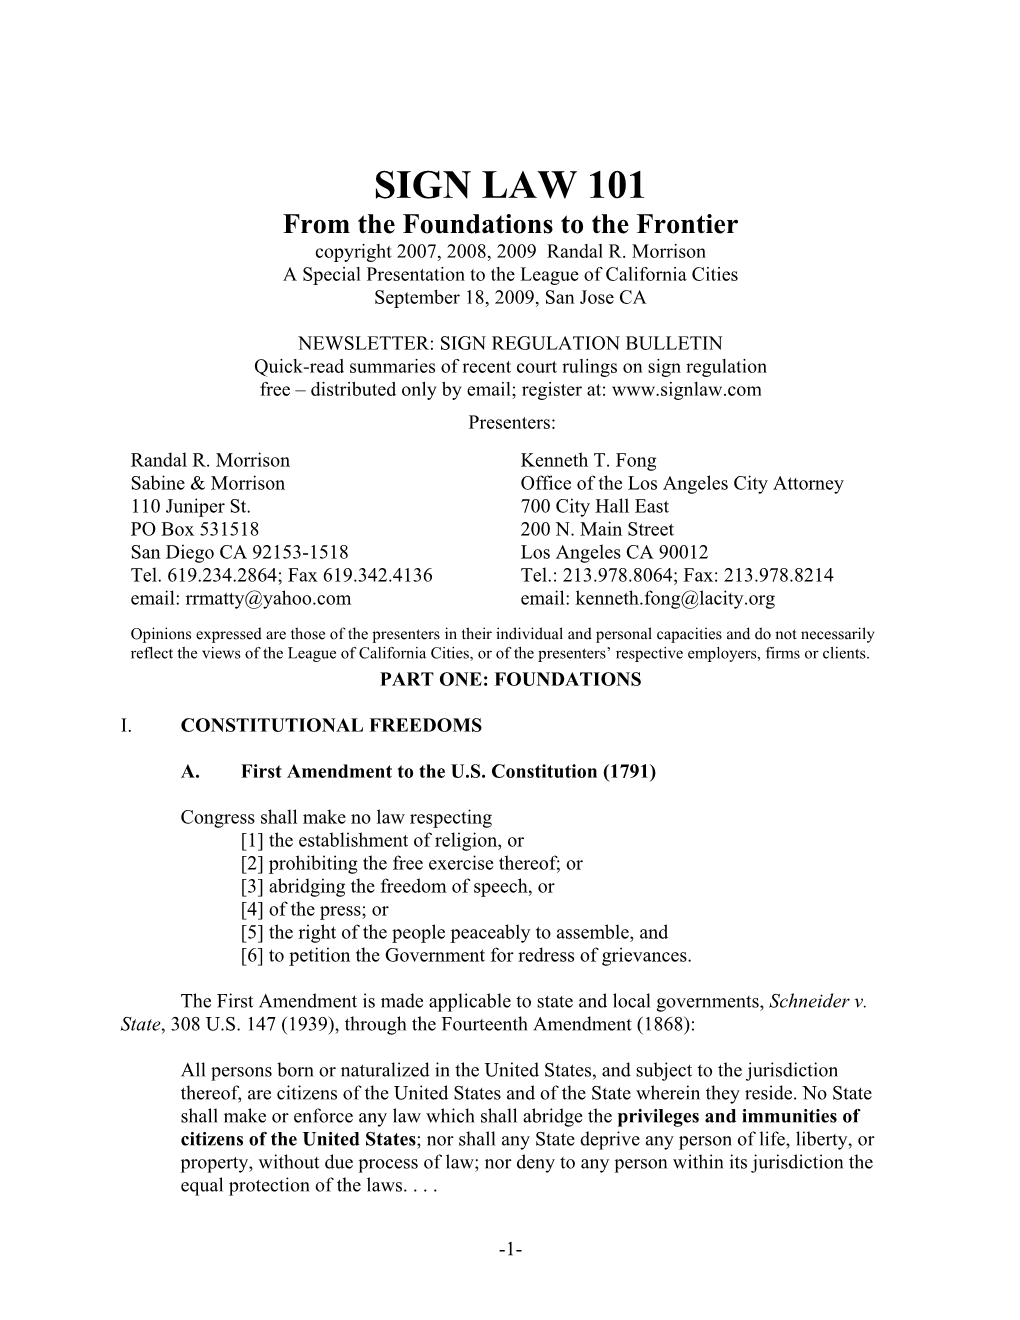 SIGN LAW 101 from the Foundations to the Frontier Copyright 2007, 2008, 2009 Randal R